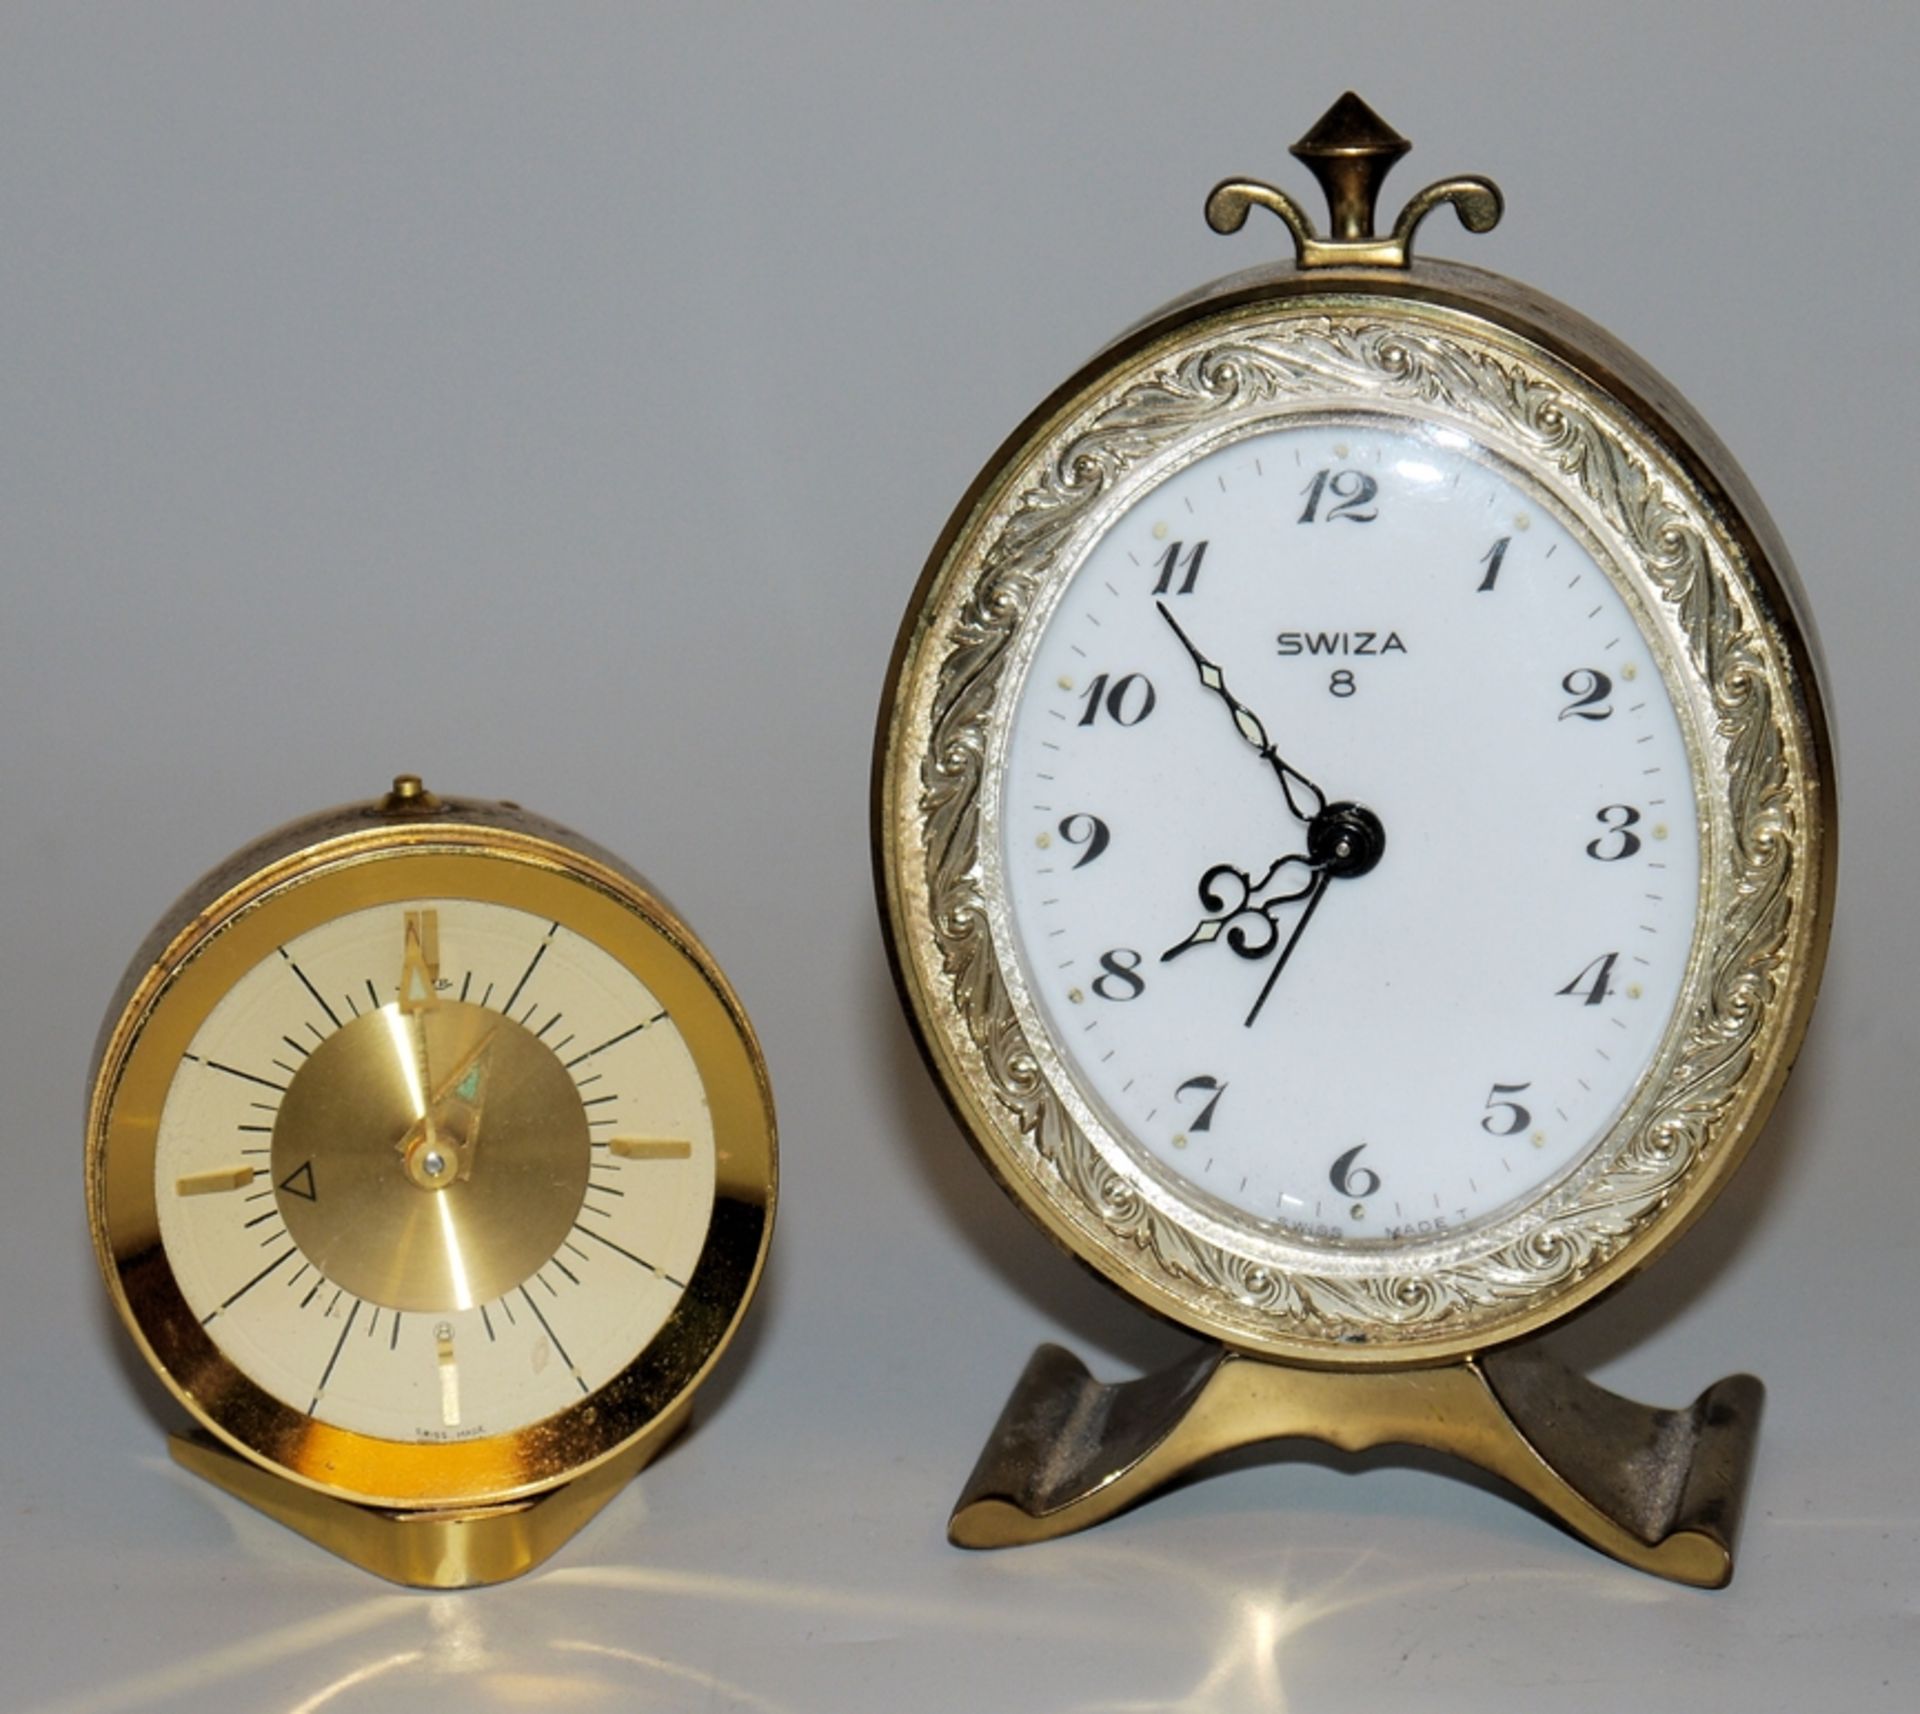 2 Table clocks with 8-day movement and alarm clock, Jaeger LeCoultre & Uti Swiza, 1960s